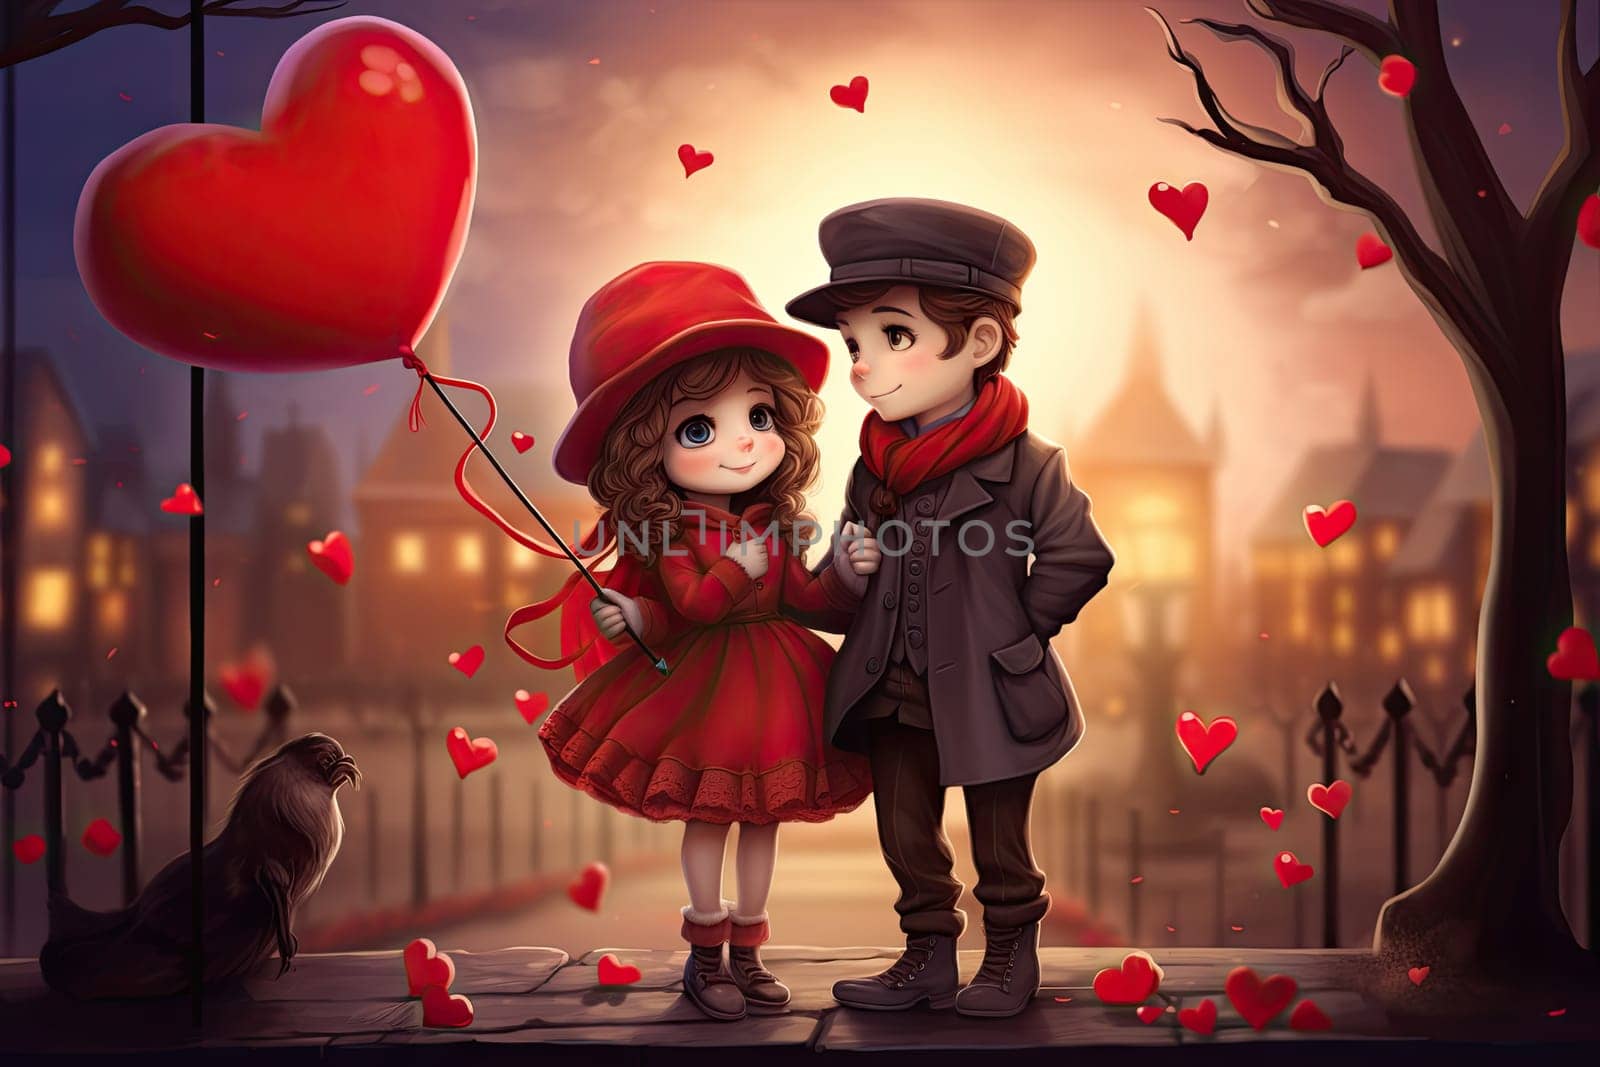 Illustration of young couple in love walking in winter time surrounded by hearts by papatonic